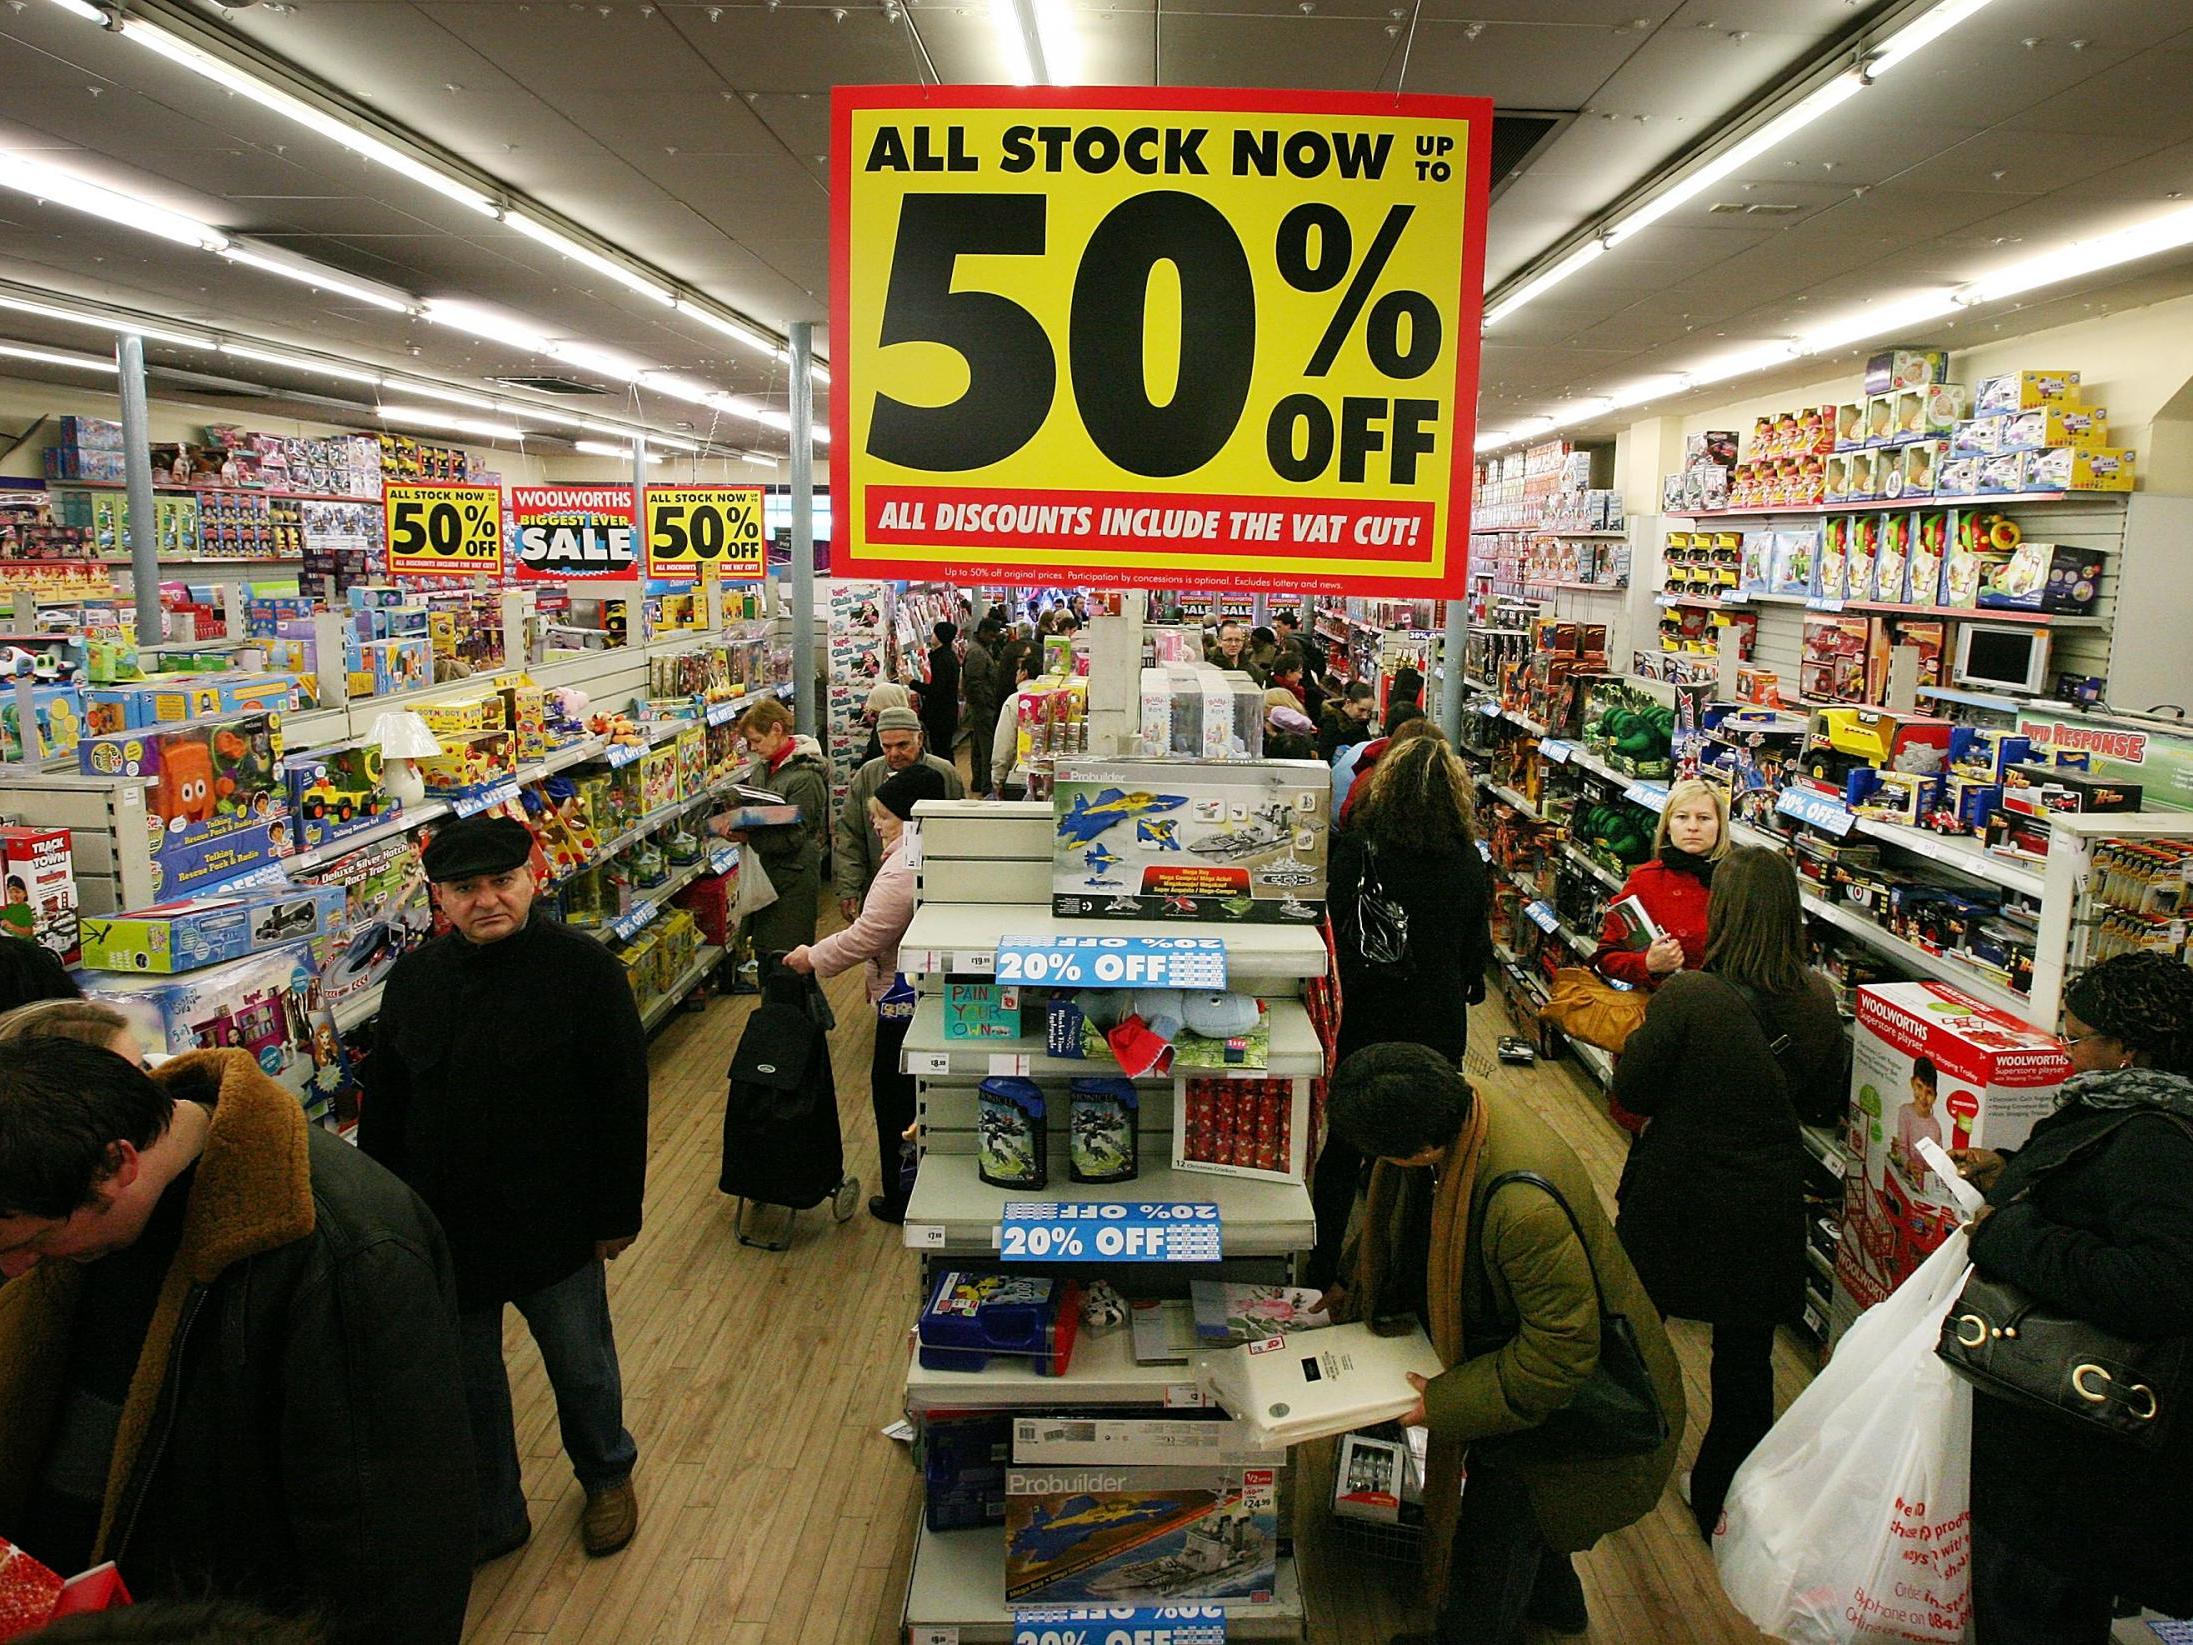 Customers shop in a branch of Woolworths in Camden on 5 December 2008